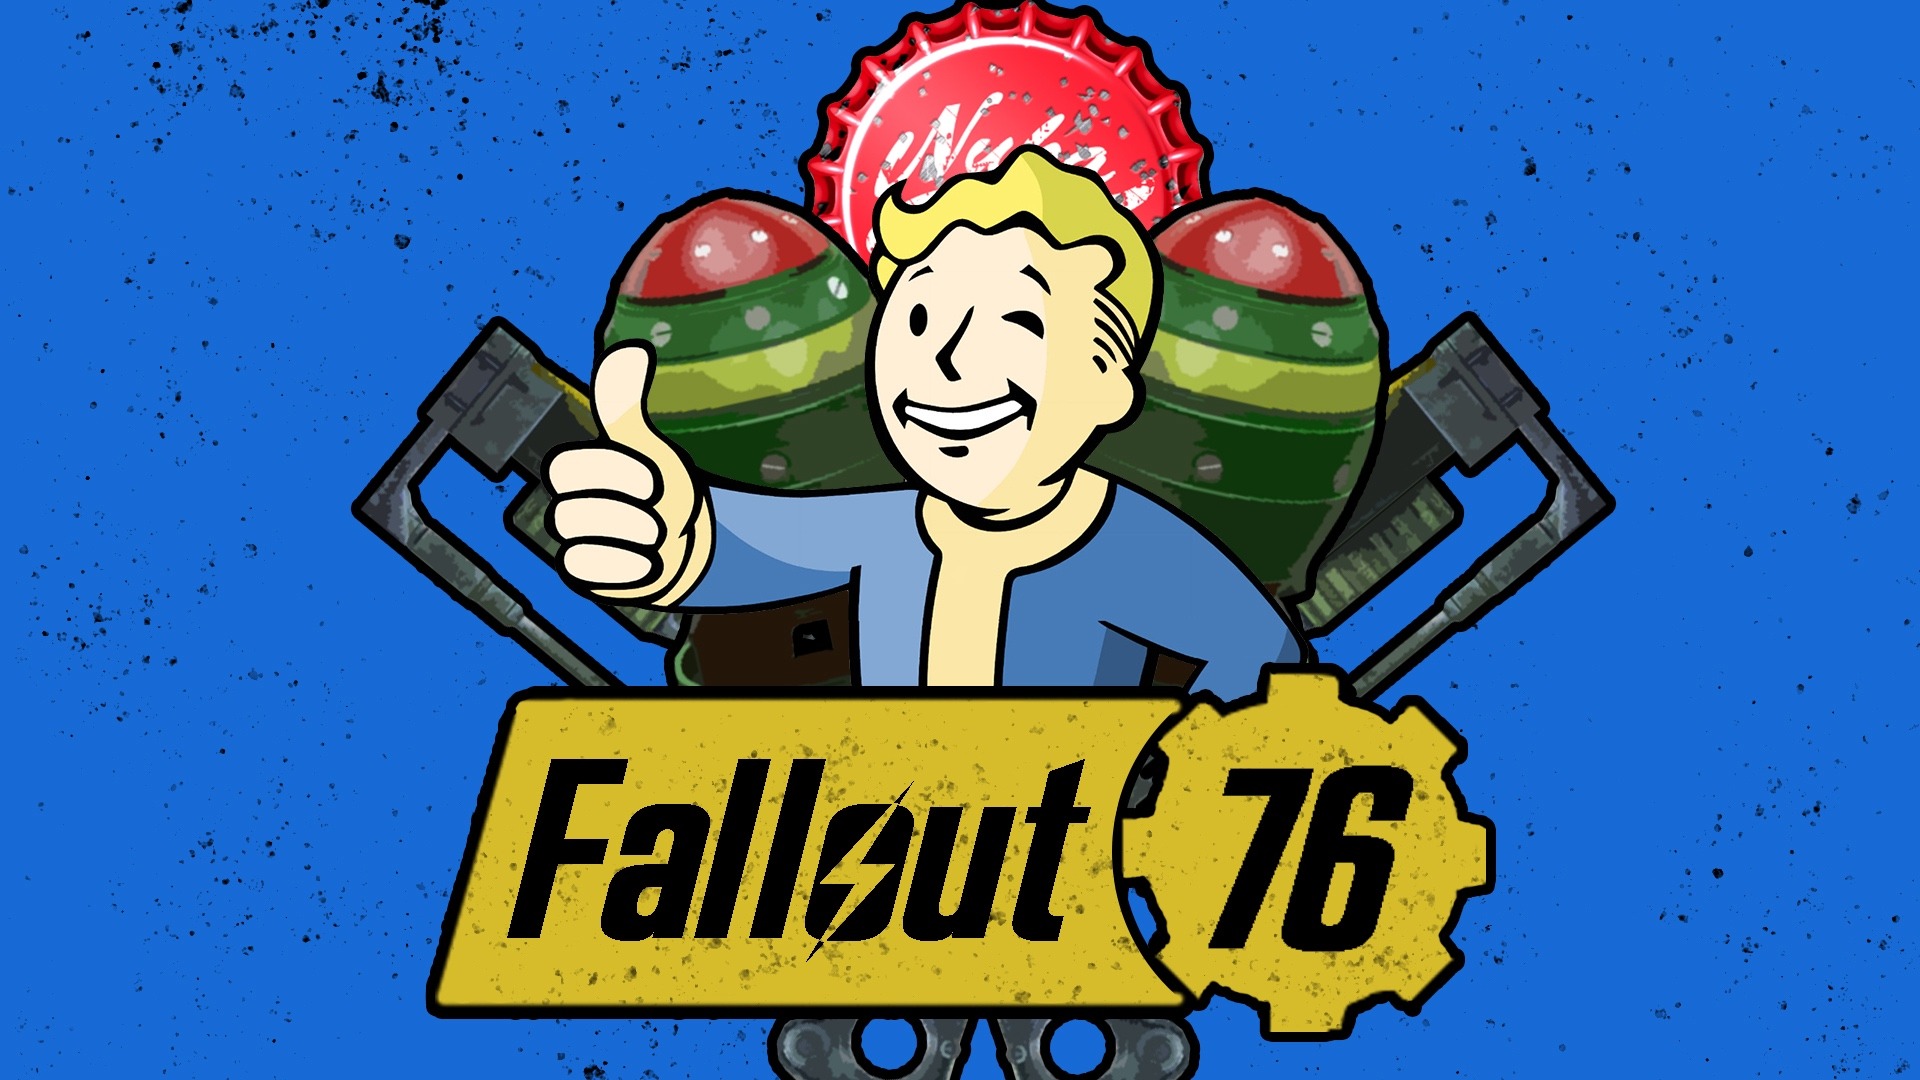 Fallout 76 on steam фото 87